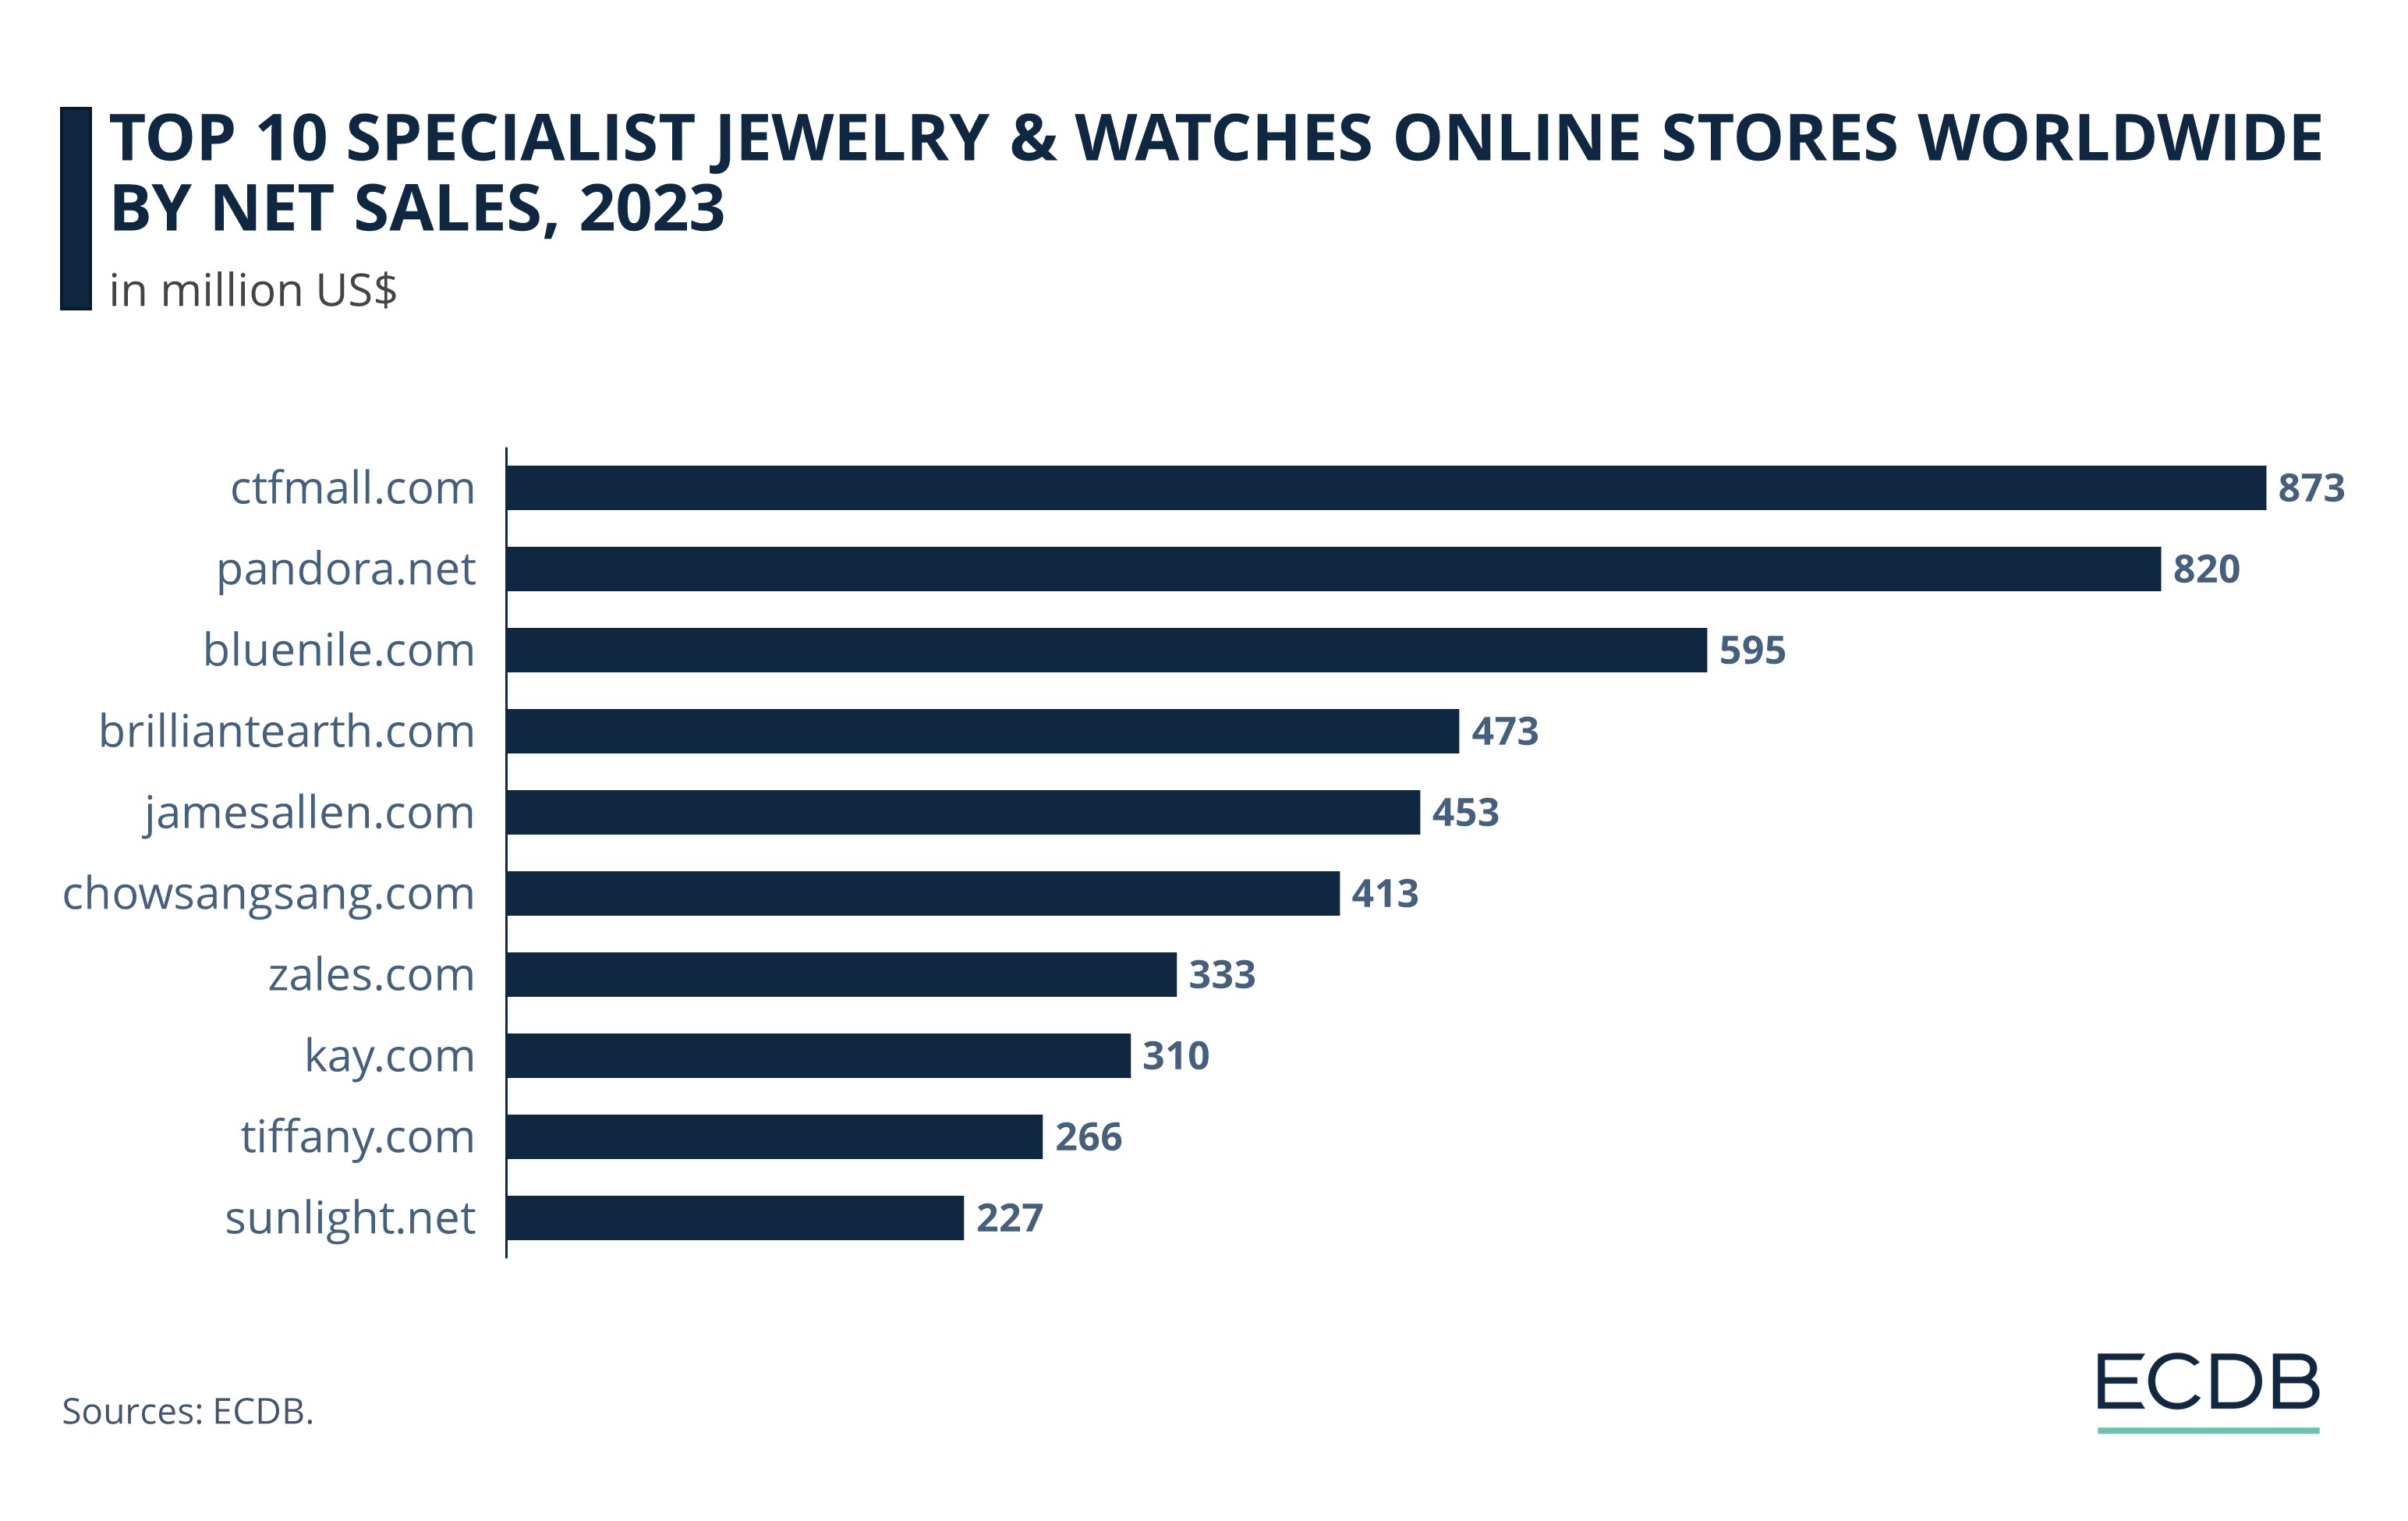 Top 10 Specialist Jewelry & Watches Online Stores Worldwide by Net Sales, 2023